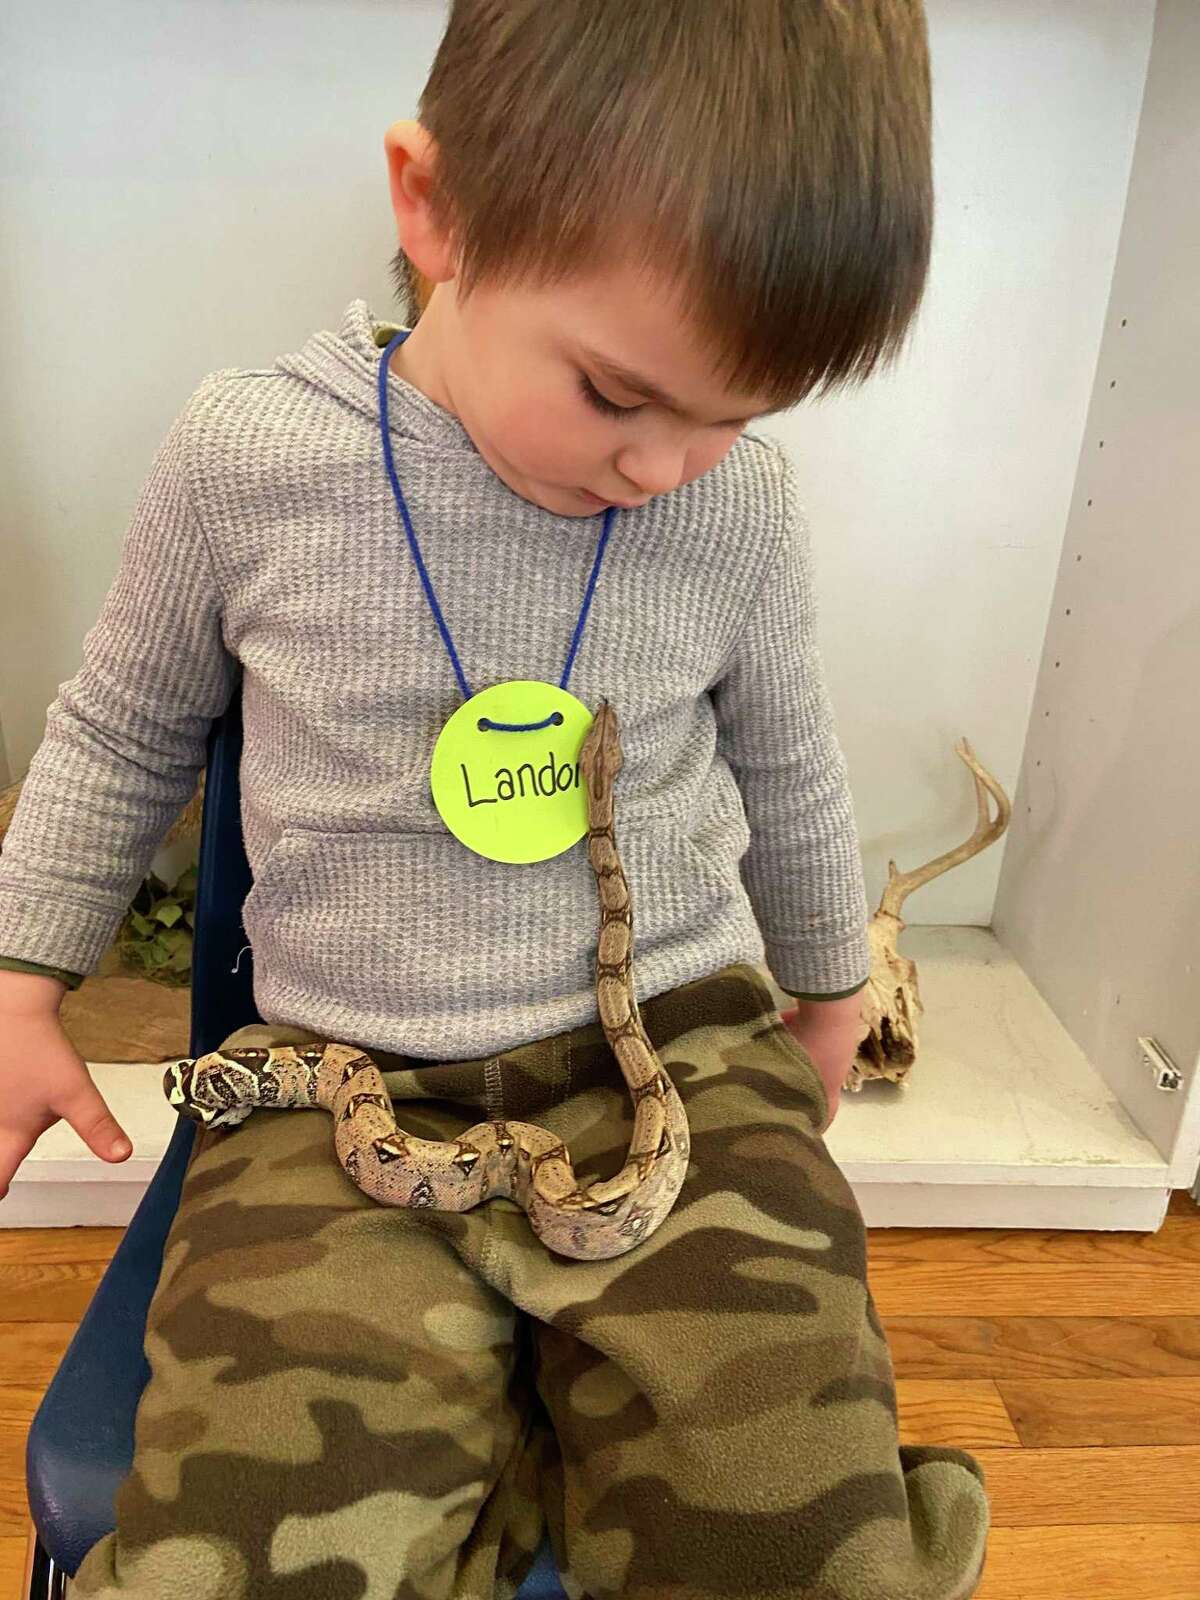 Landon Marchison, 3, from Ridgefield, watches as Indira, the new Colombian Red-Tailed Boa Constrictor, slithers on his lap at the Woodcock Nature Center on Feb. 17.